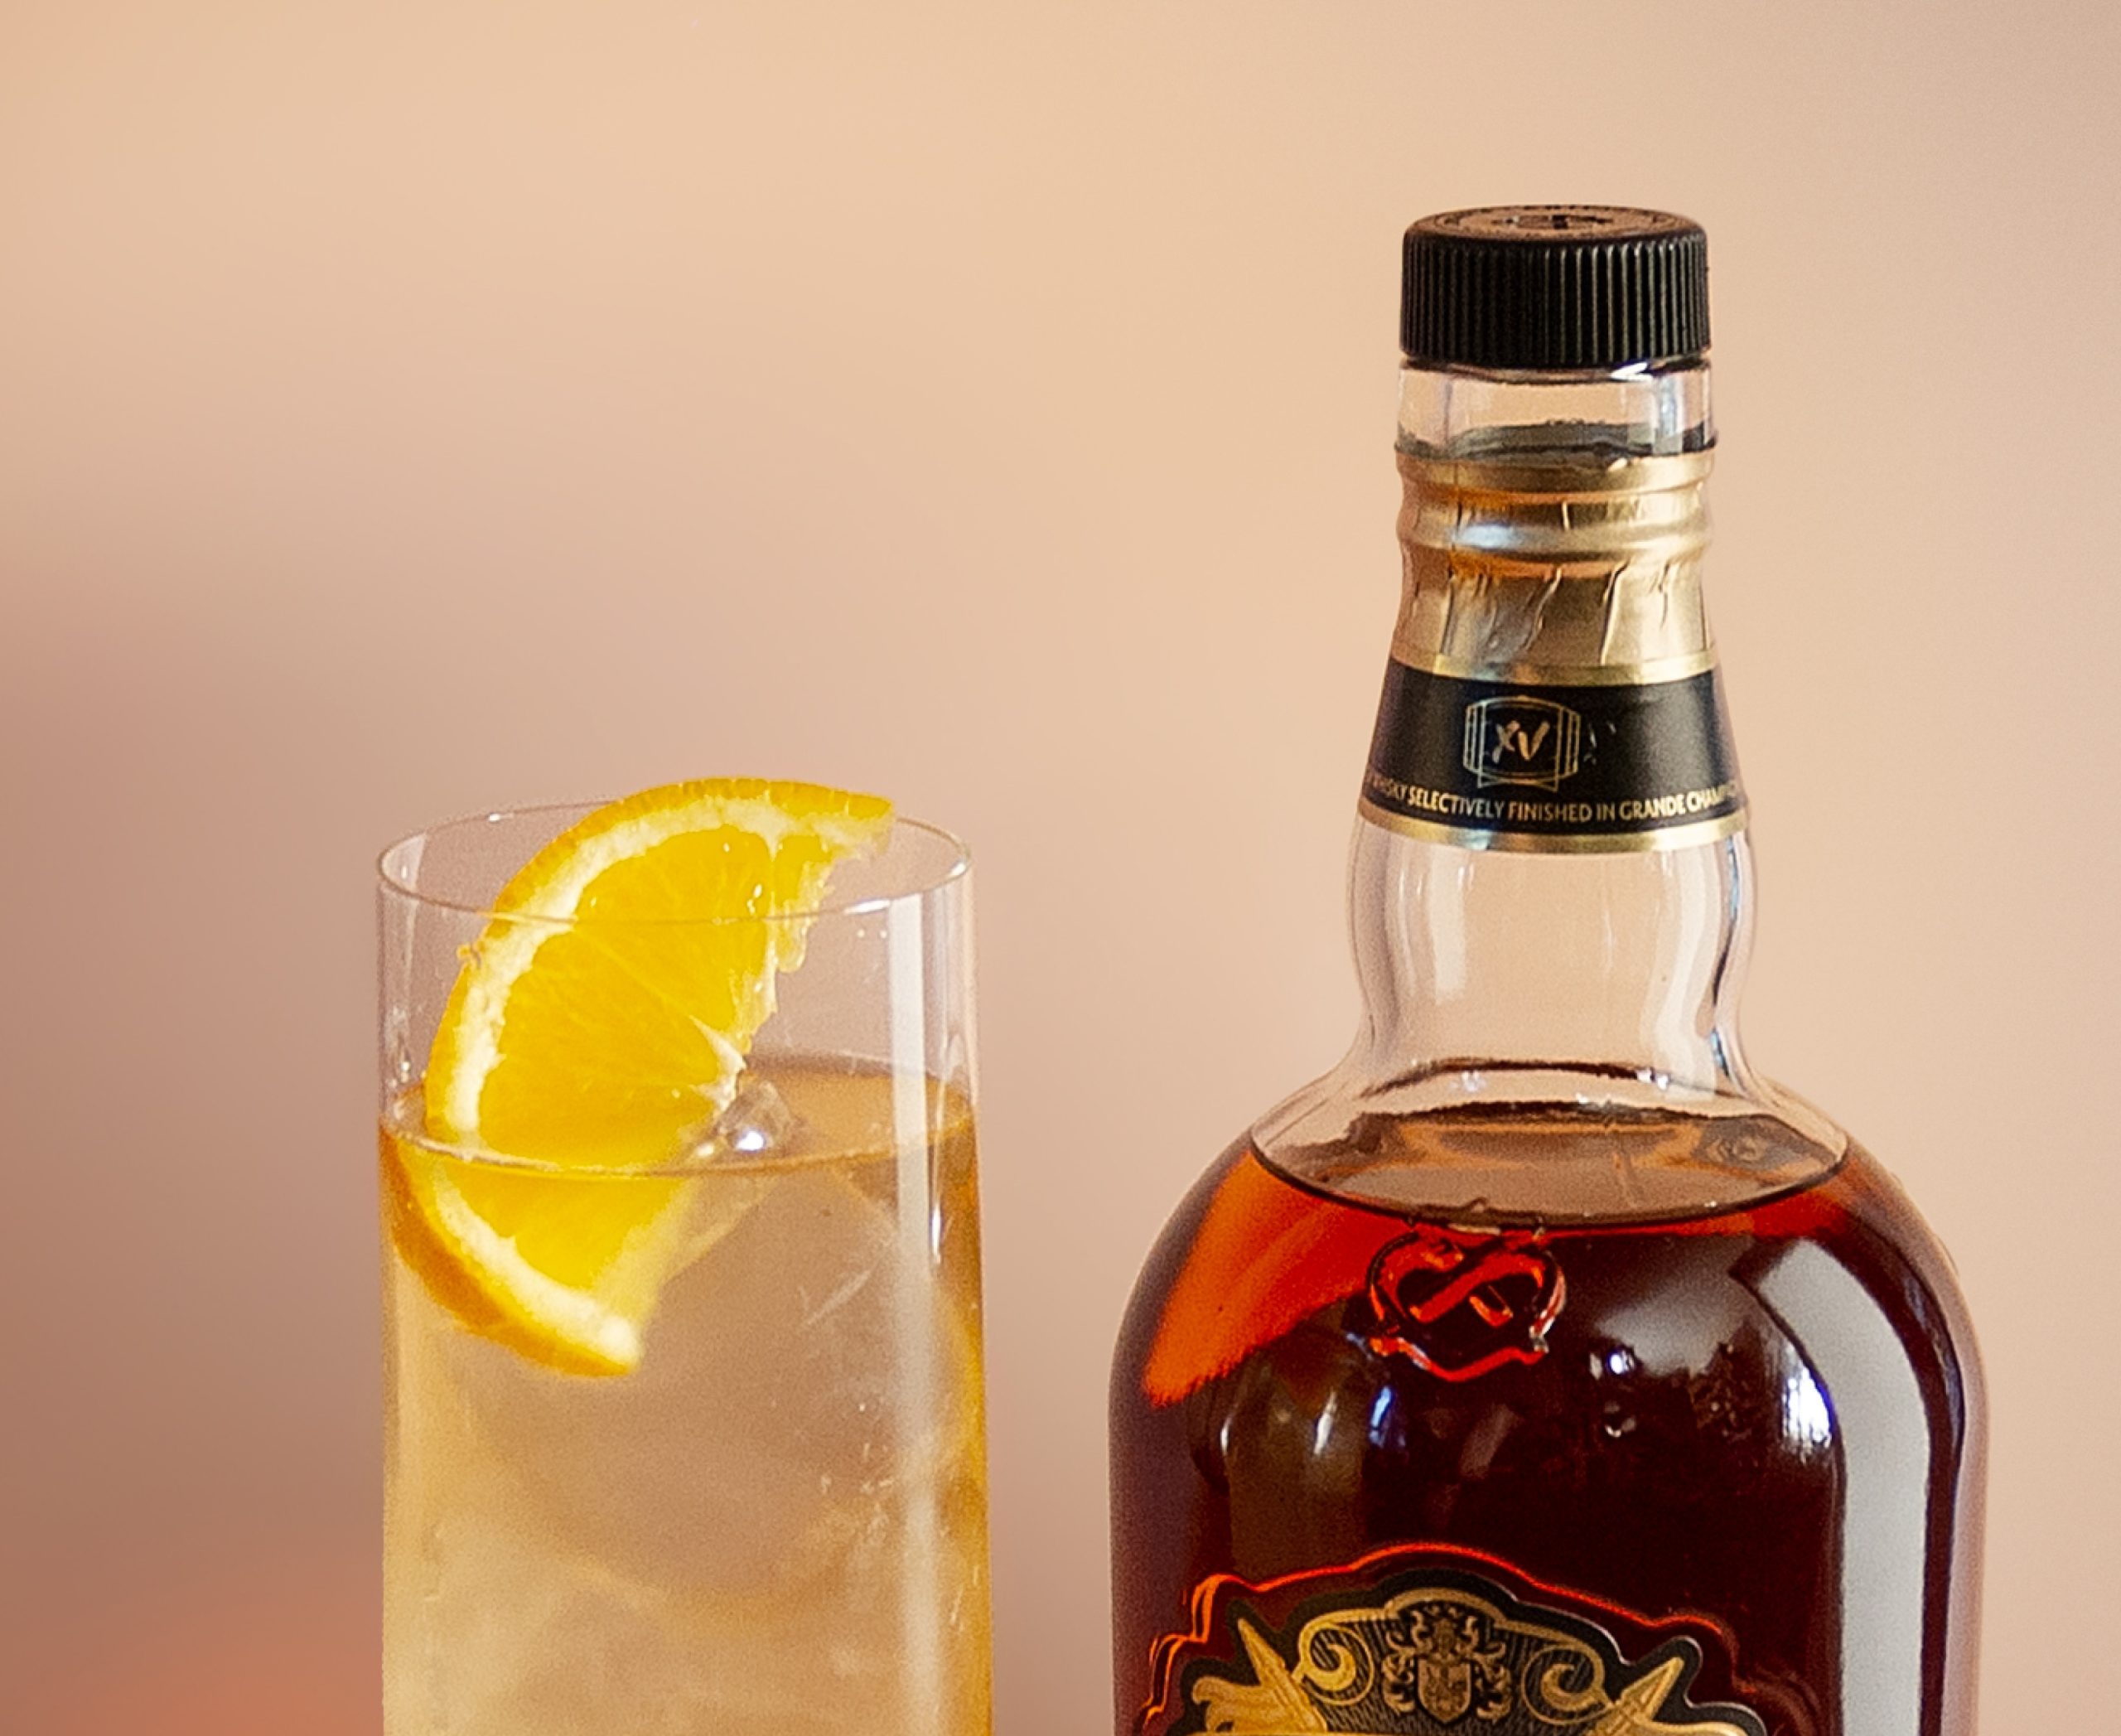 Spiced Apricot Highball Whisky Cocktail 1